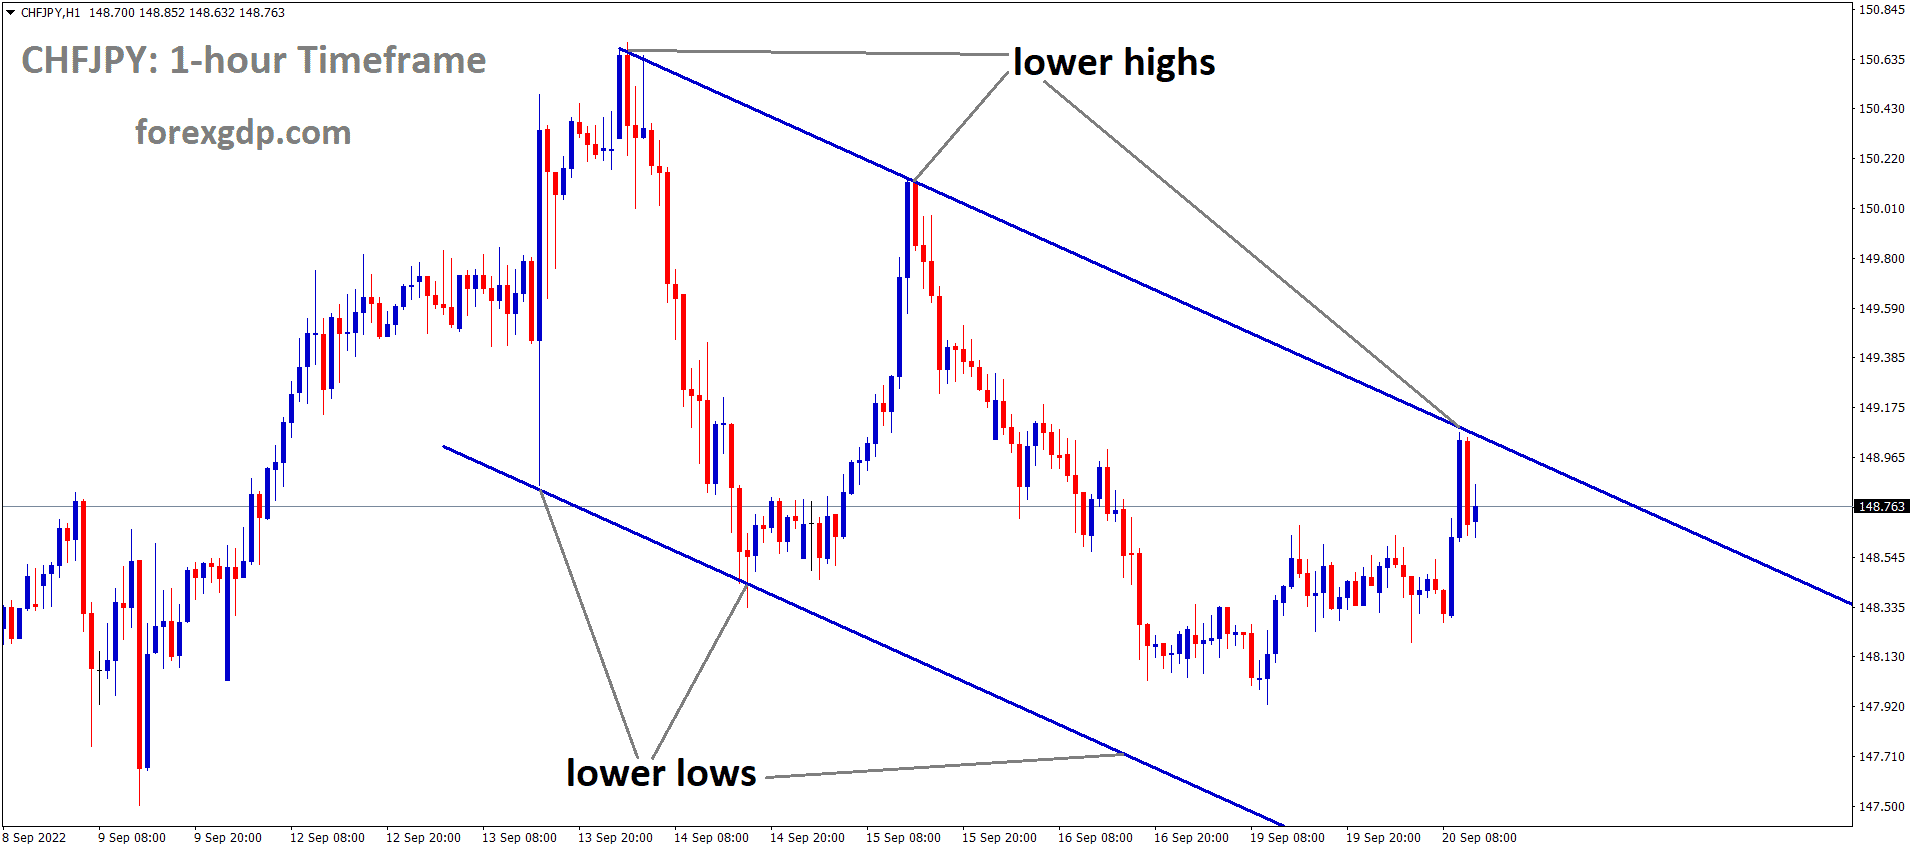 CHFJPY is moving in the Descending channel and the market has fallen from the lower high area of the channel